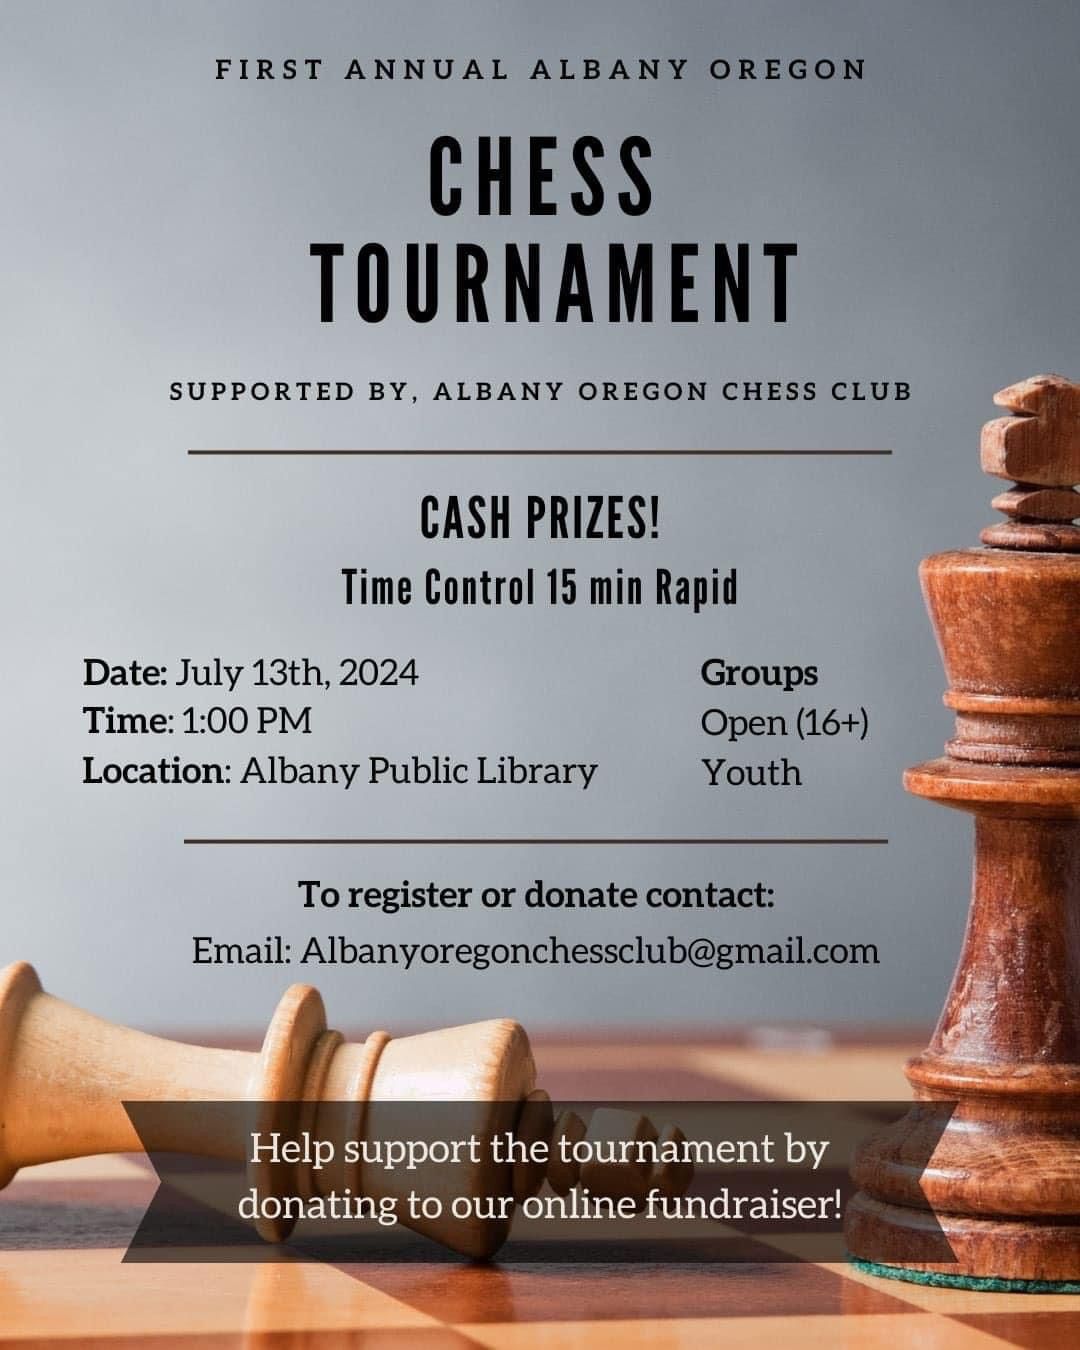 First Annual Albany Oregon chess tournament